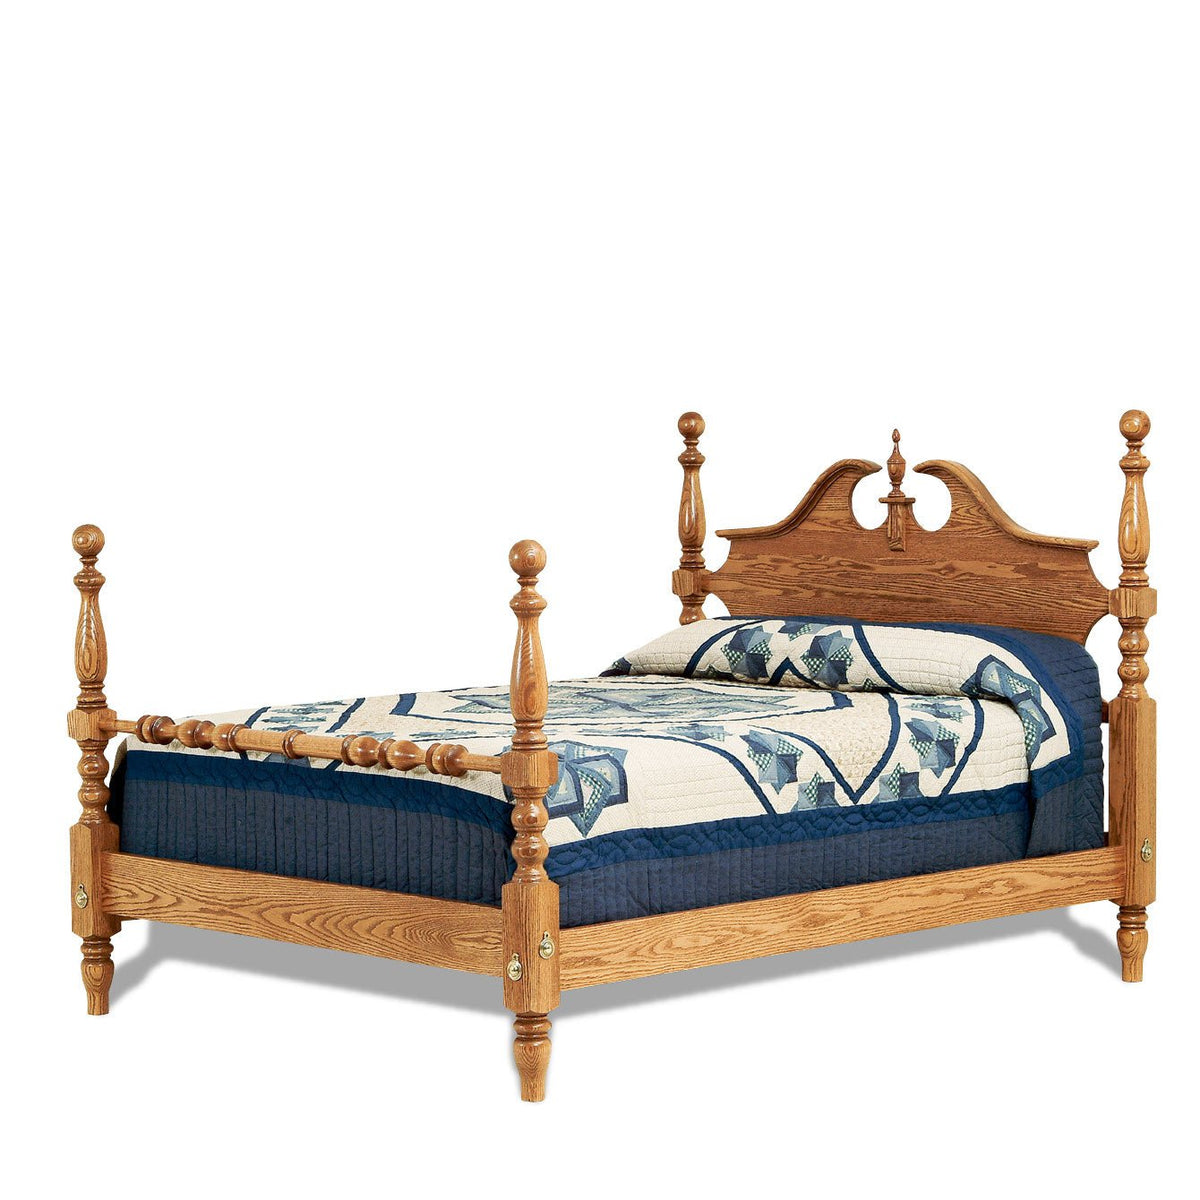 Jamestown Cannonball Bed - snyders.furniture